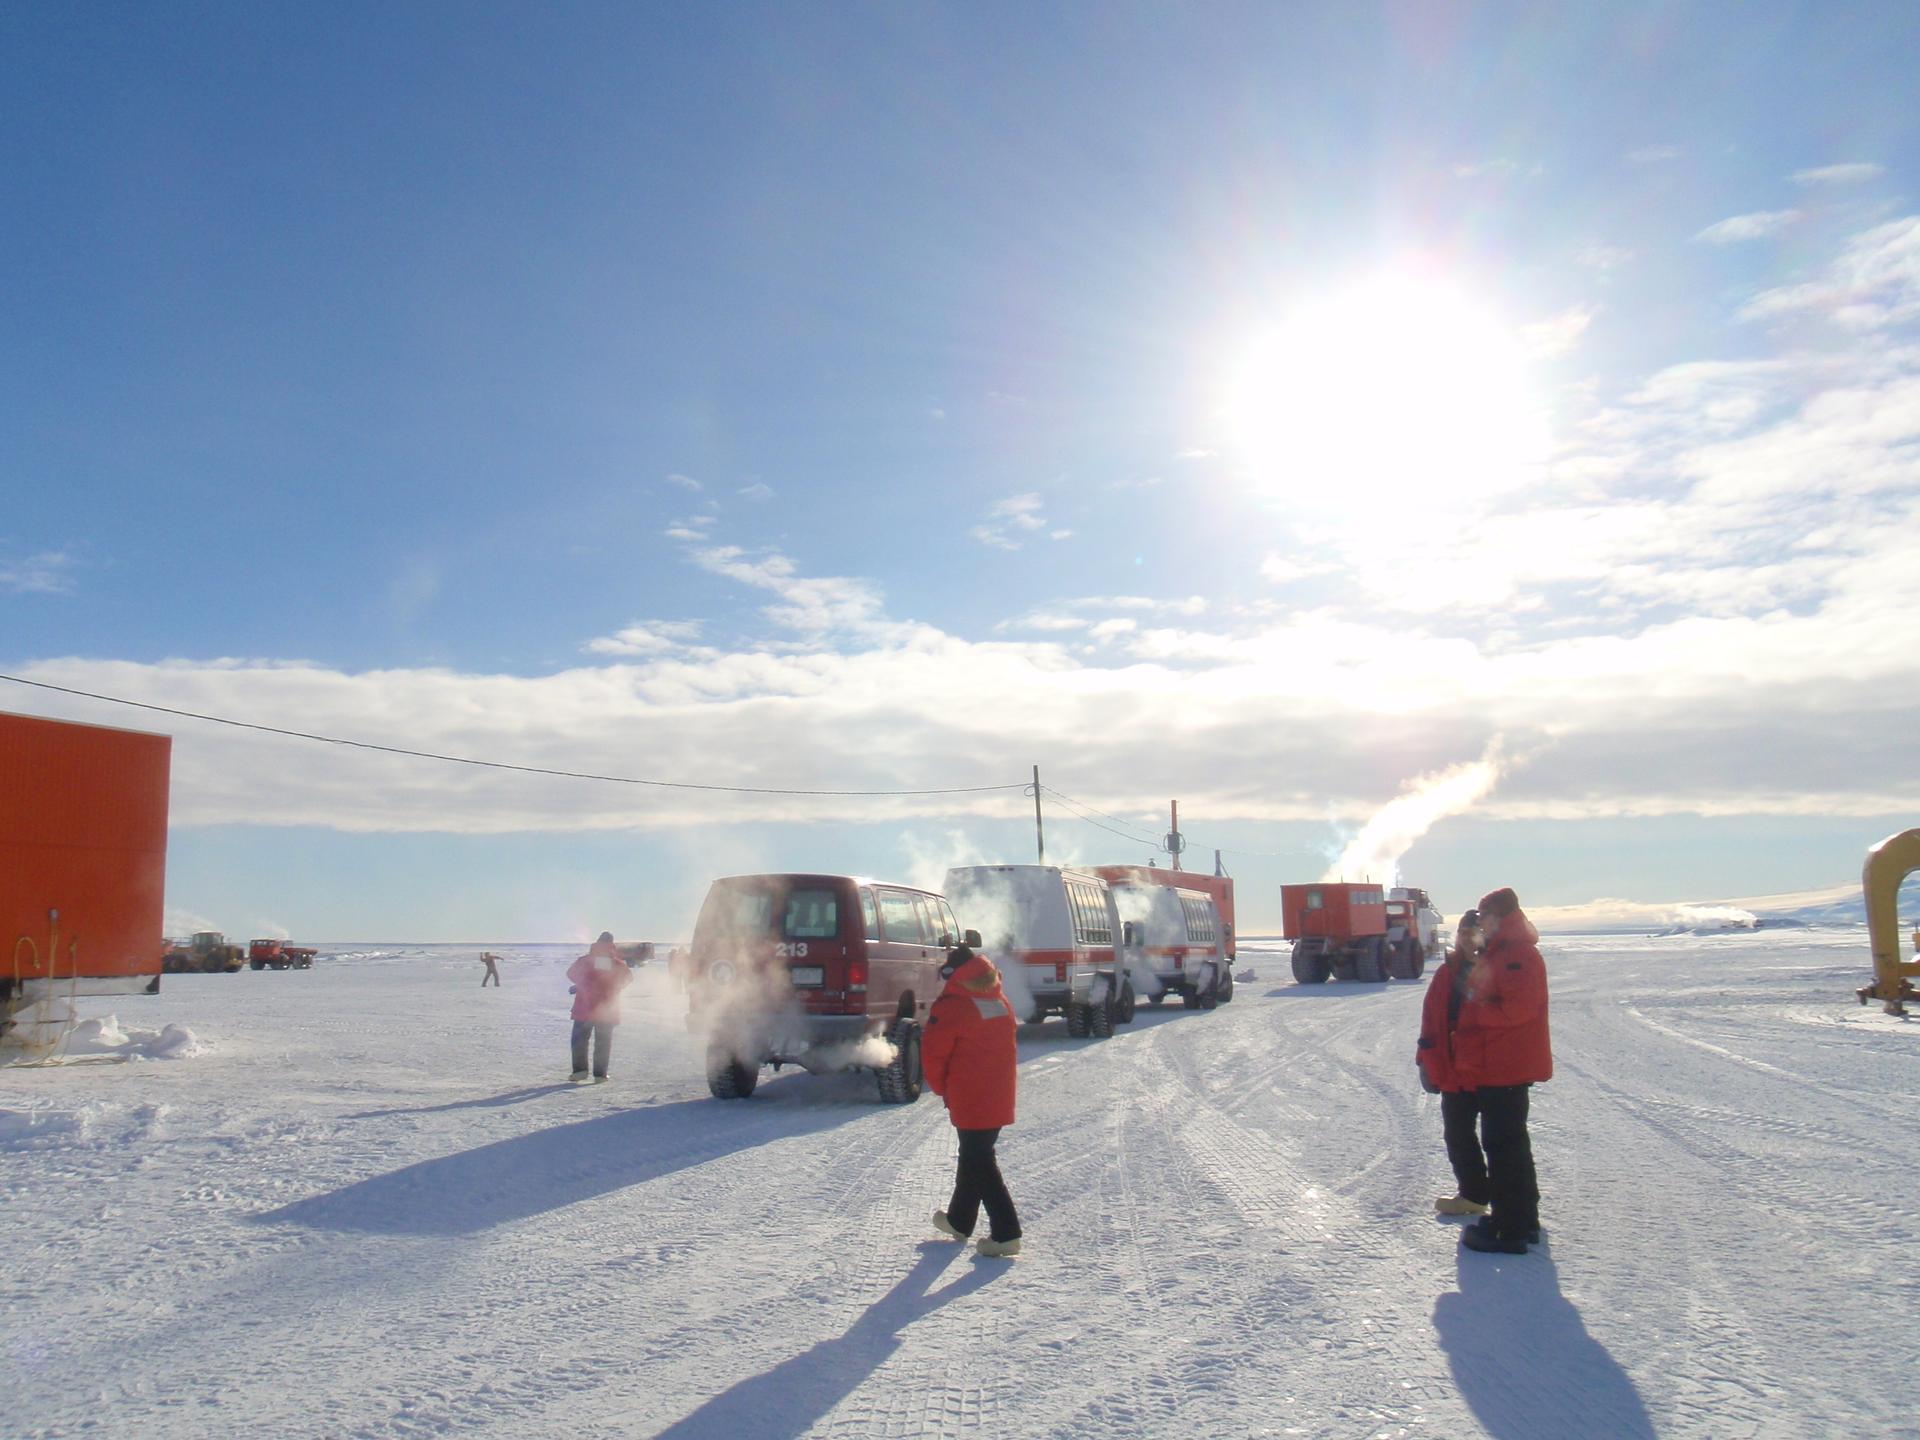 Shuttles idling near Pegasus Field, an airstrip that serves the McMurdo Station research facility on Antarctica's Ross Ice Shelf.